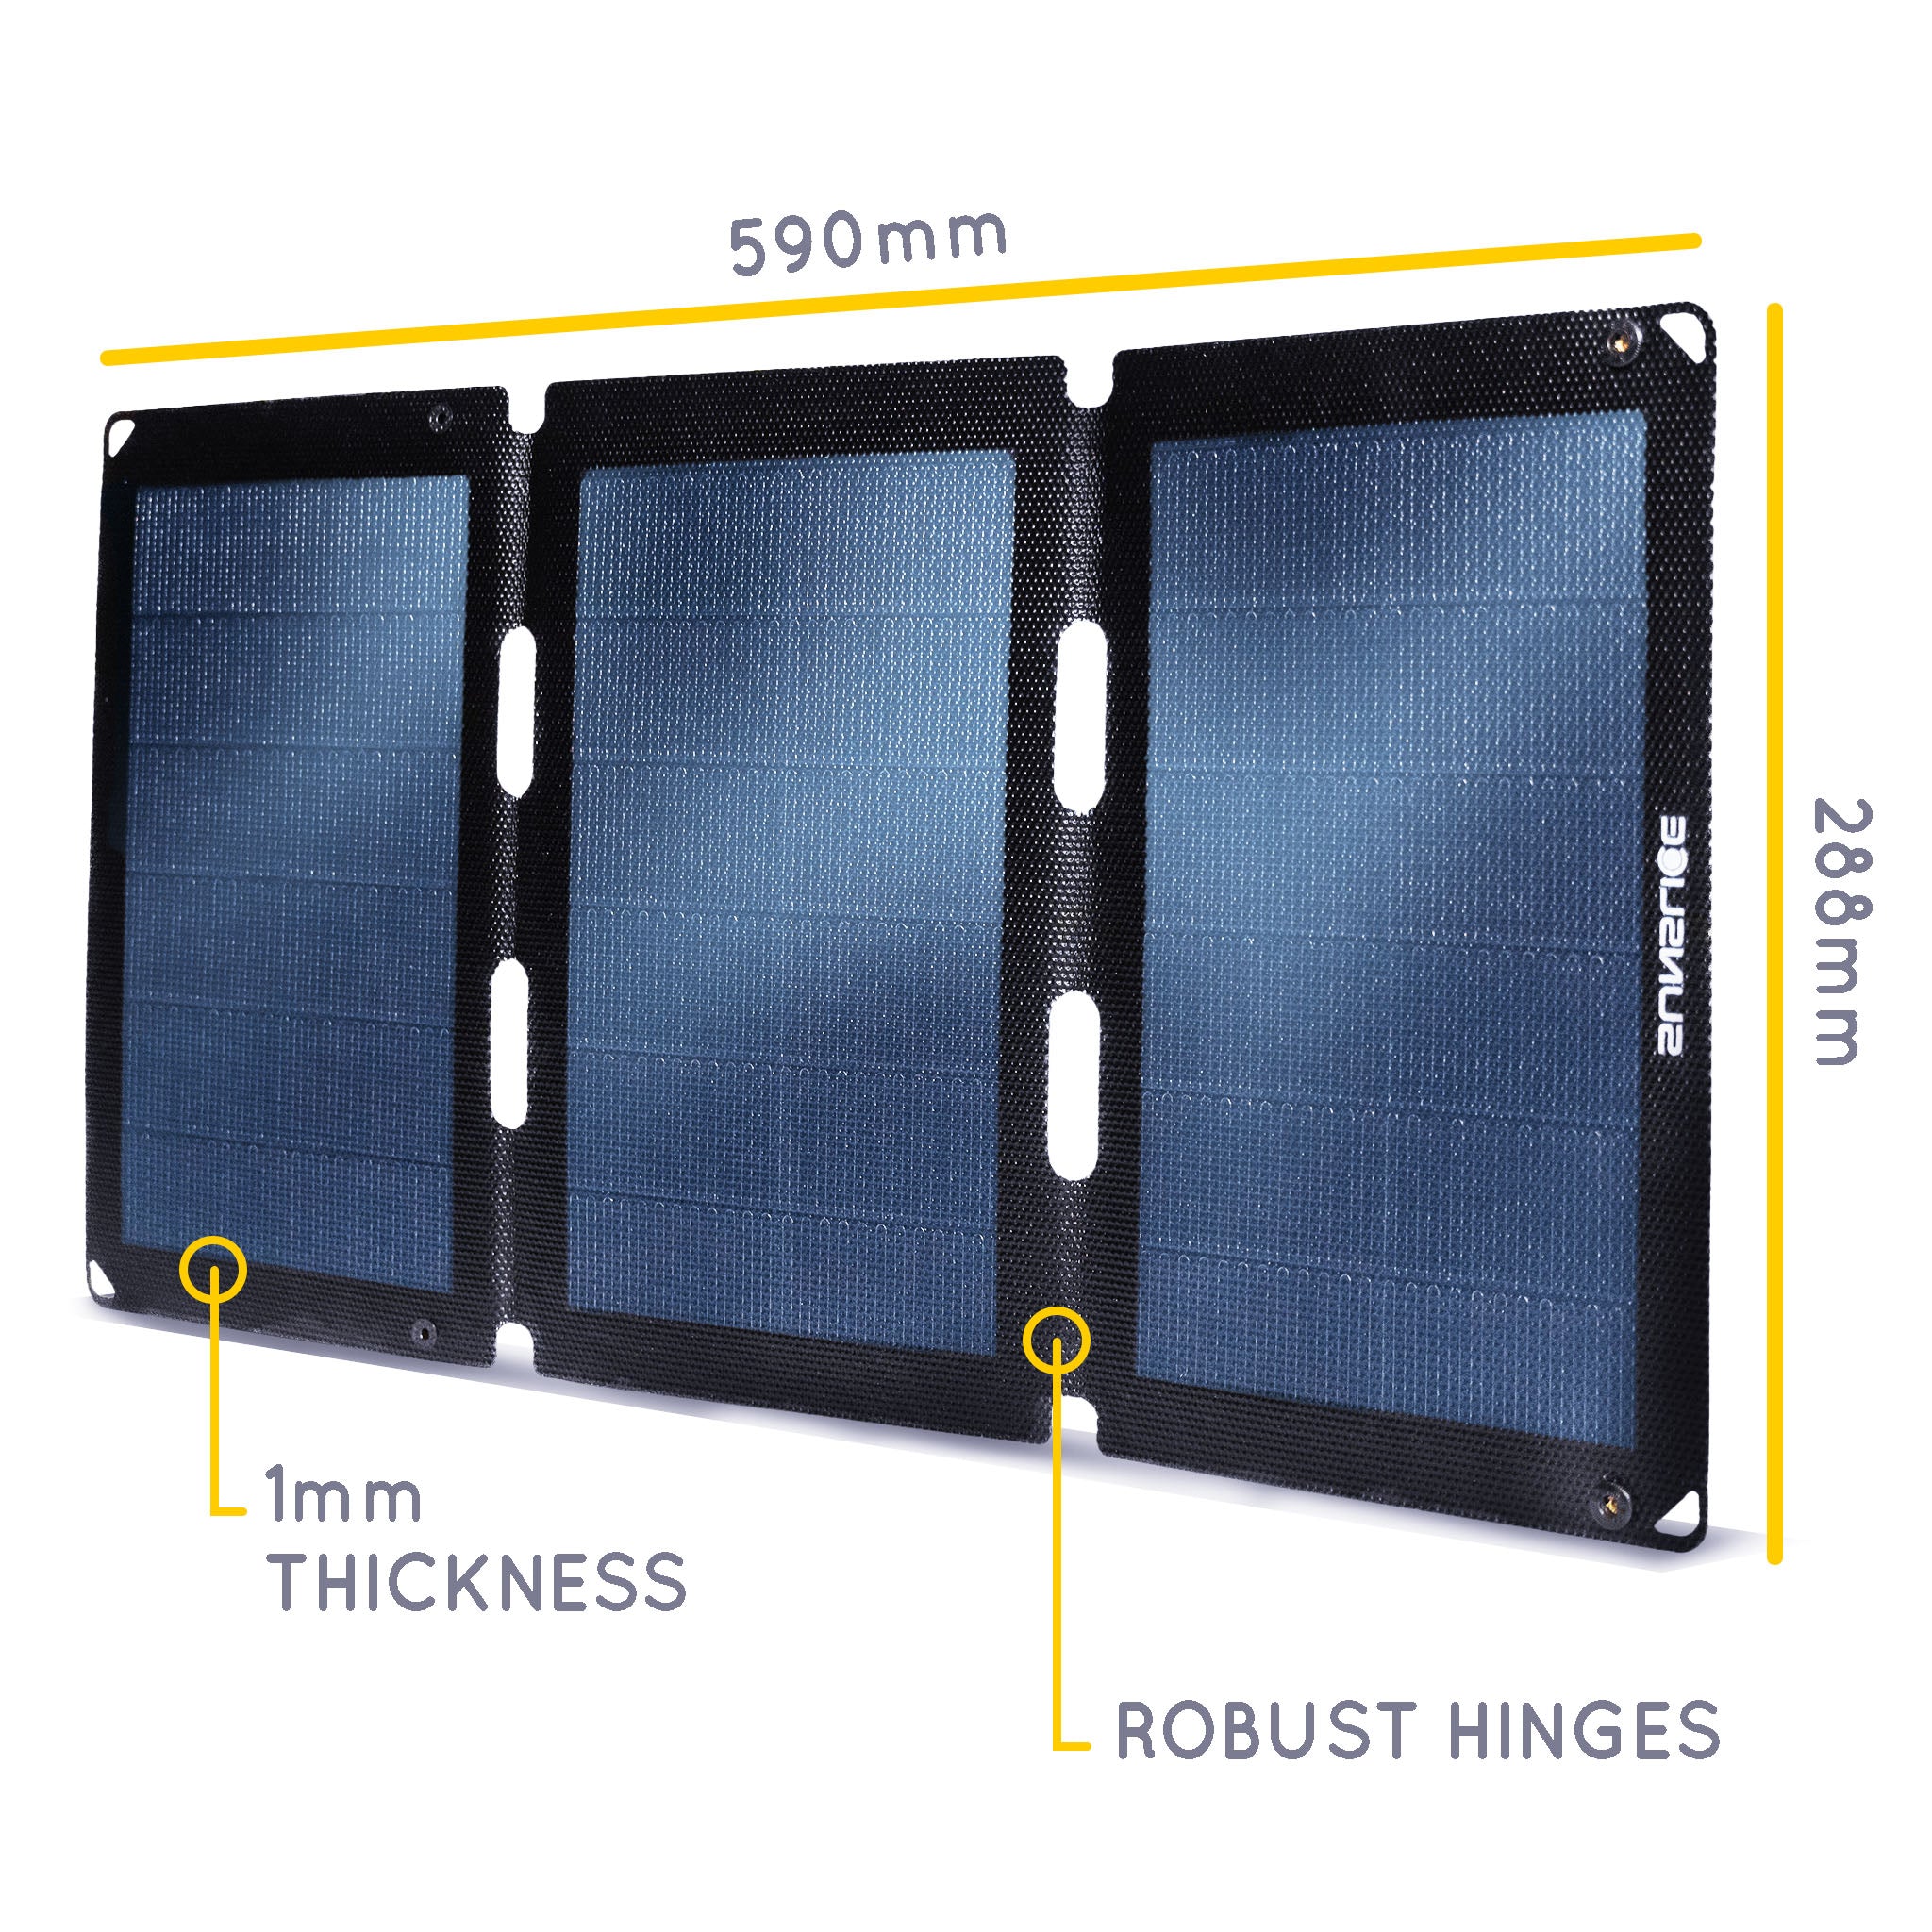 Solar panel ( 3 panels) informations : Size : 590mm, 288 mm, Thickness 1mm.